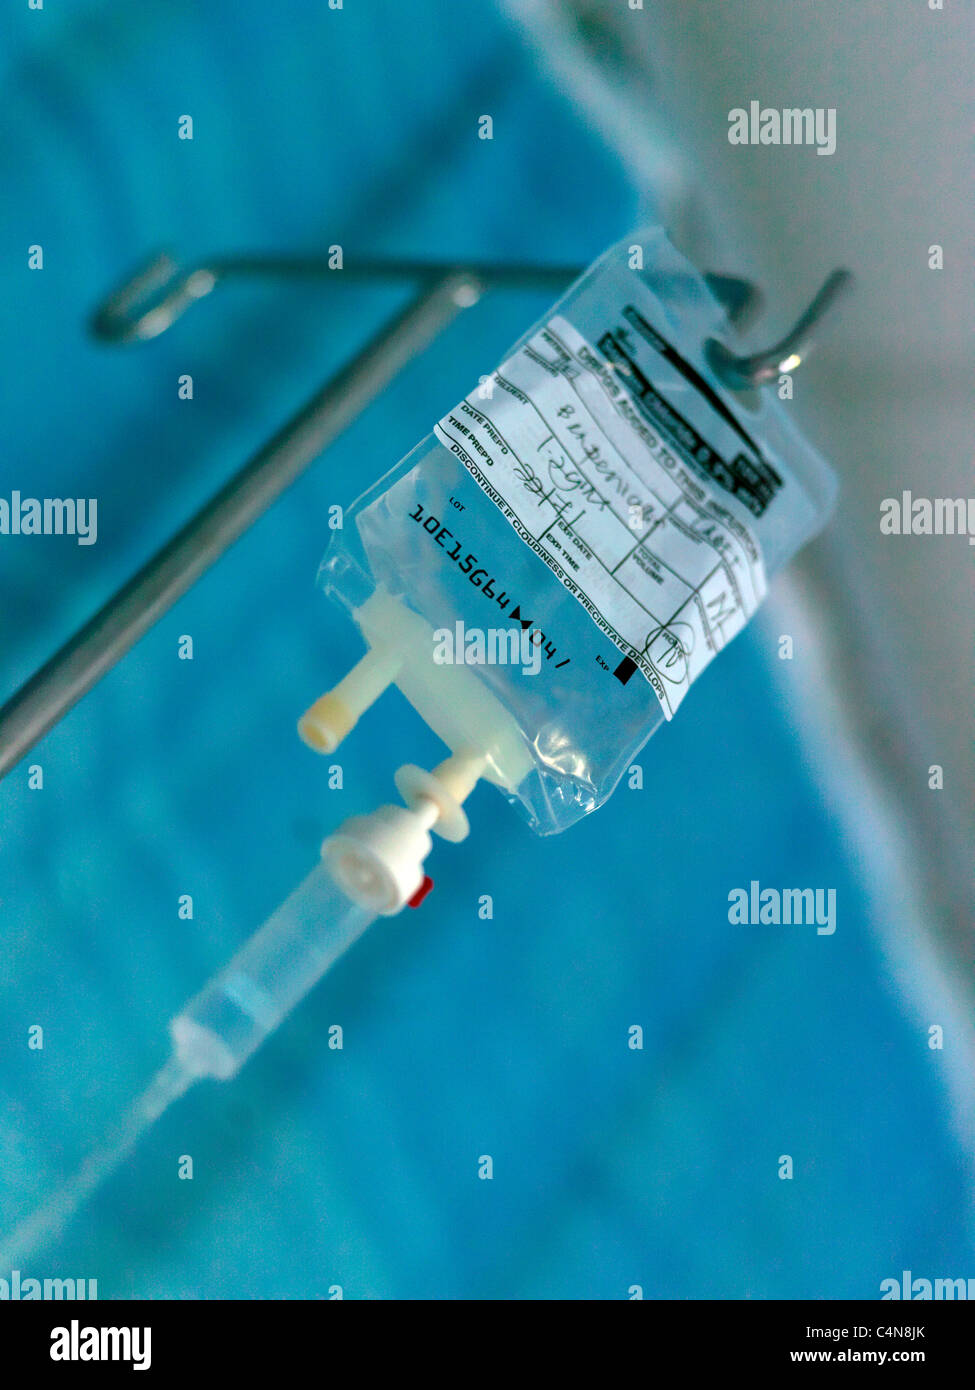 Intravenous Drip Sodium Chloride Infusion Hanging On Hook In Hospital Stock Photo